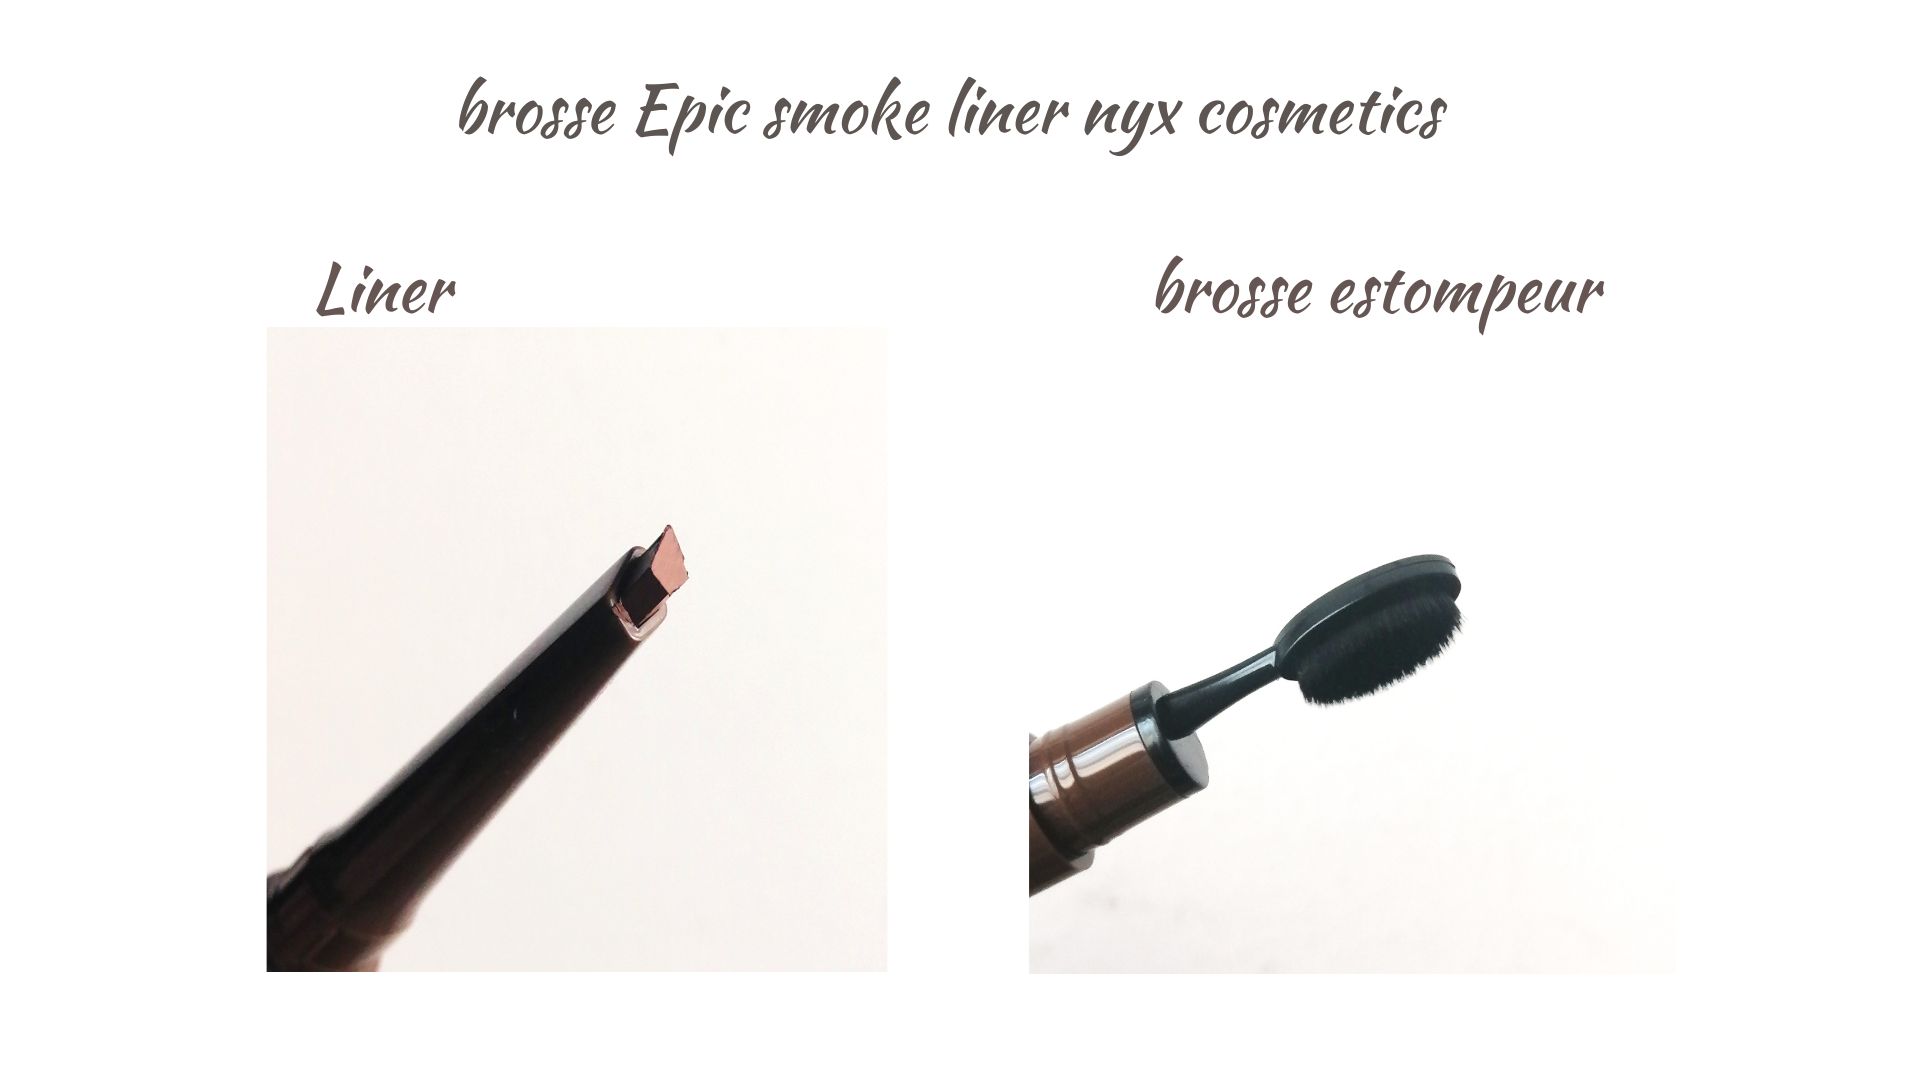 brosse embout epic smoke liner nyx cosmetics